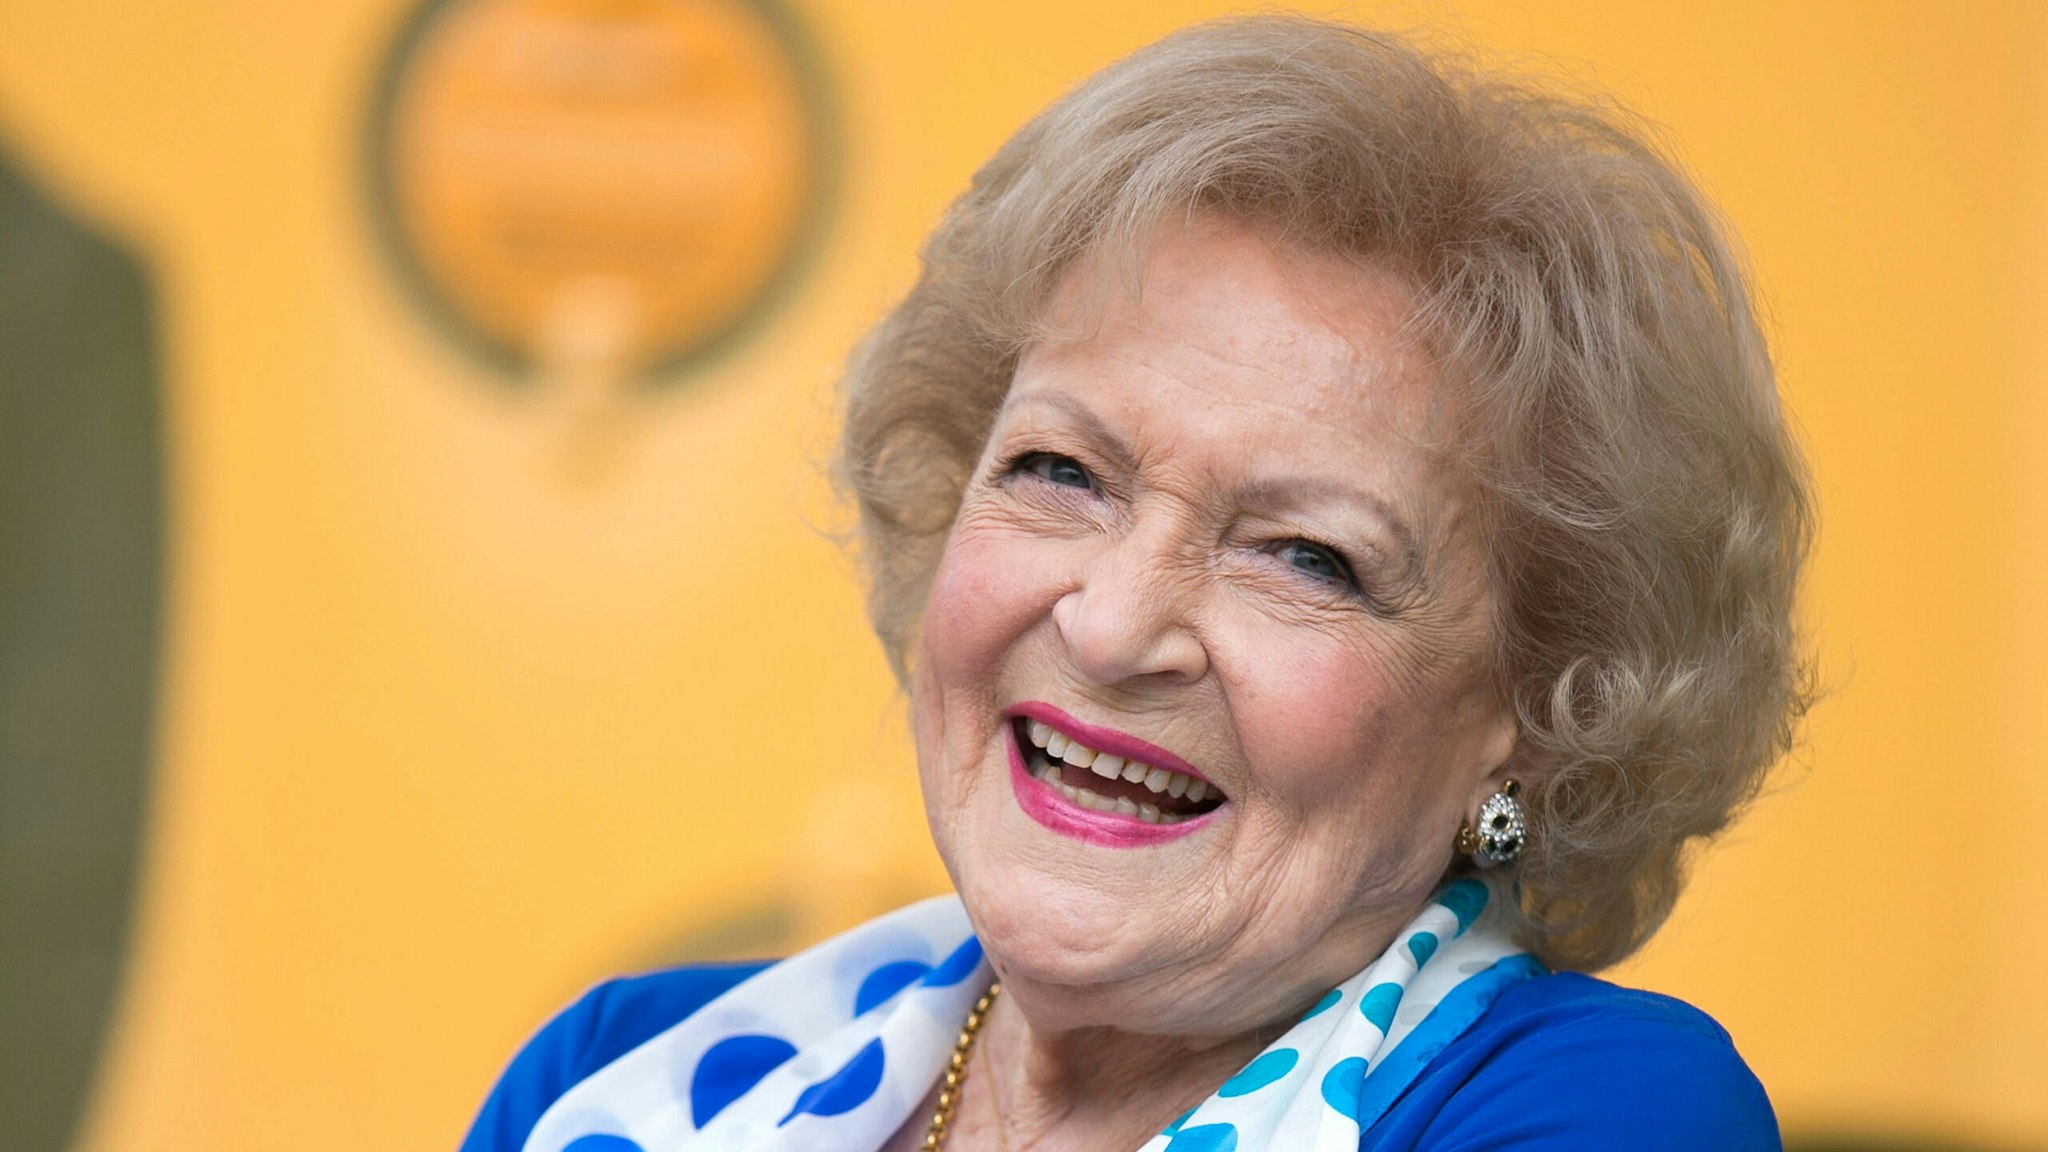 LOS ANGELES, CA - JUNE 11: Actress Betty White attends the media preview for Greater Los Angeles Zoo Association's Beastly Ball fundraiser at Los Angeles Zoo on June 11, 2015 in Los Angeles, California.